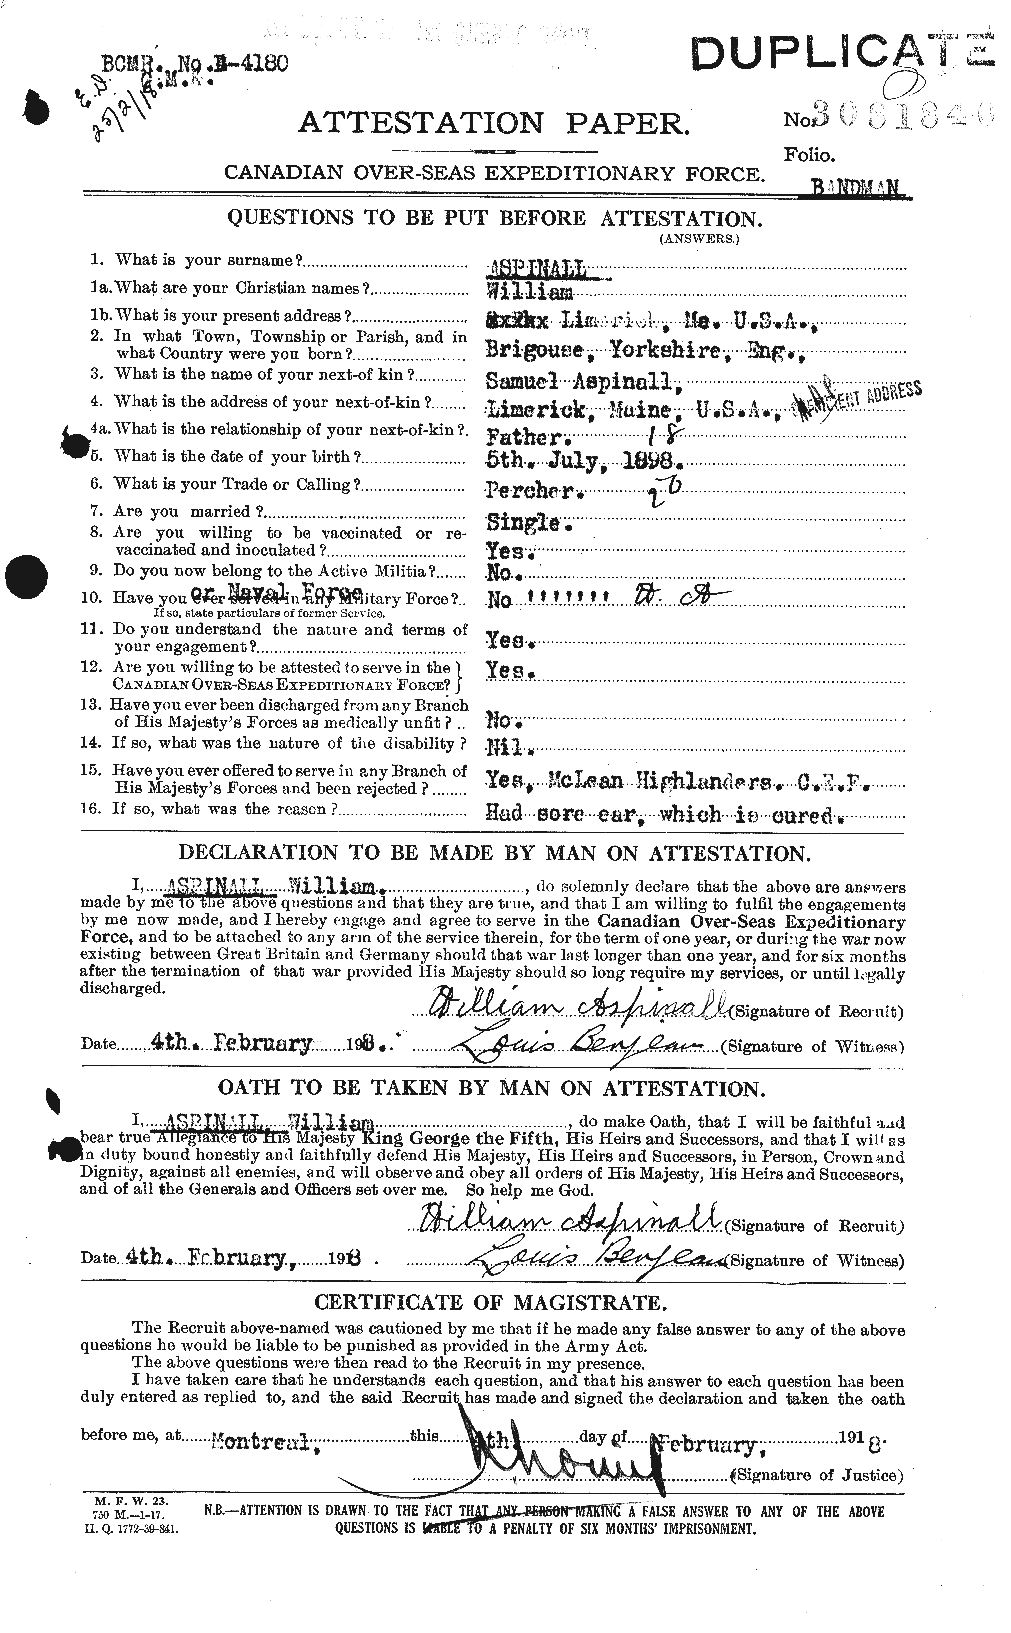 Personnel Records of the First World War - CEF 223559a